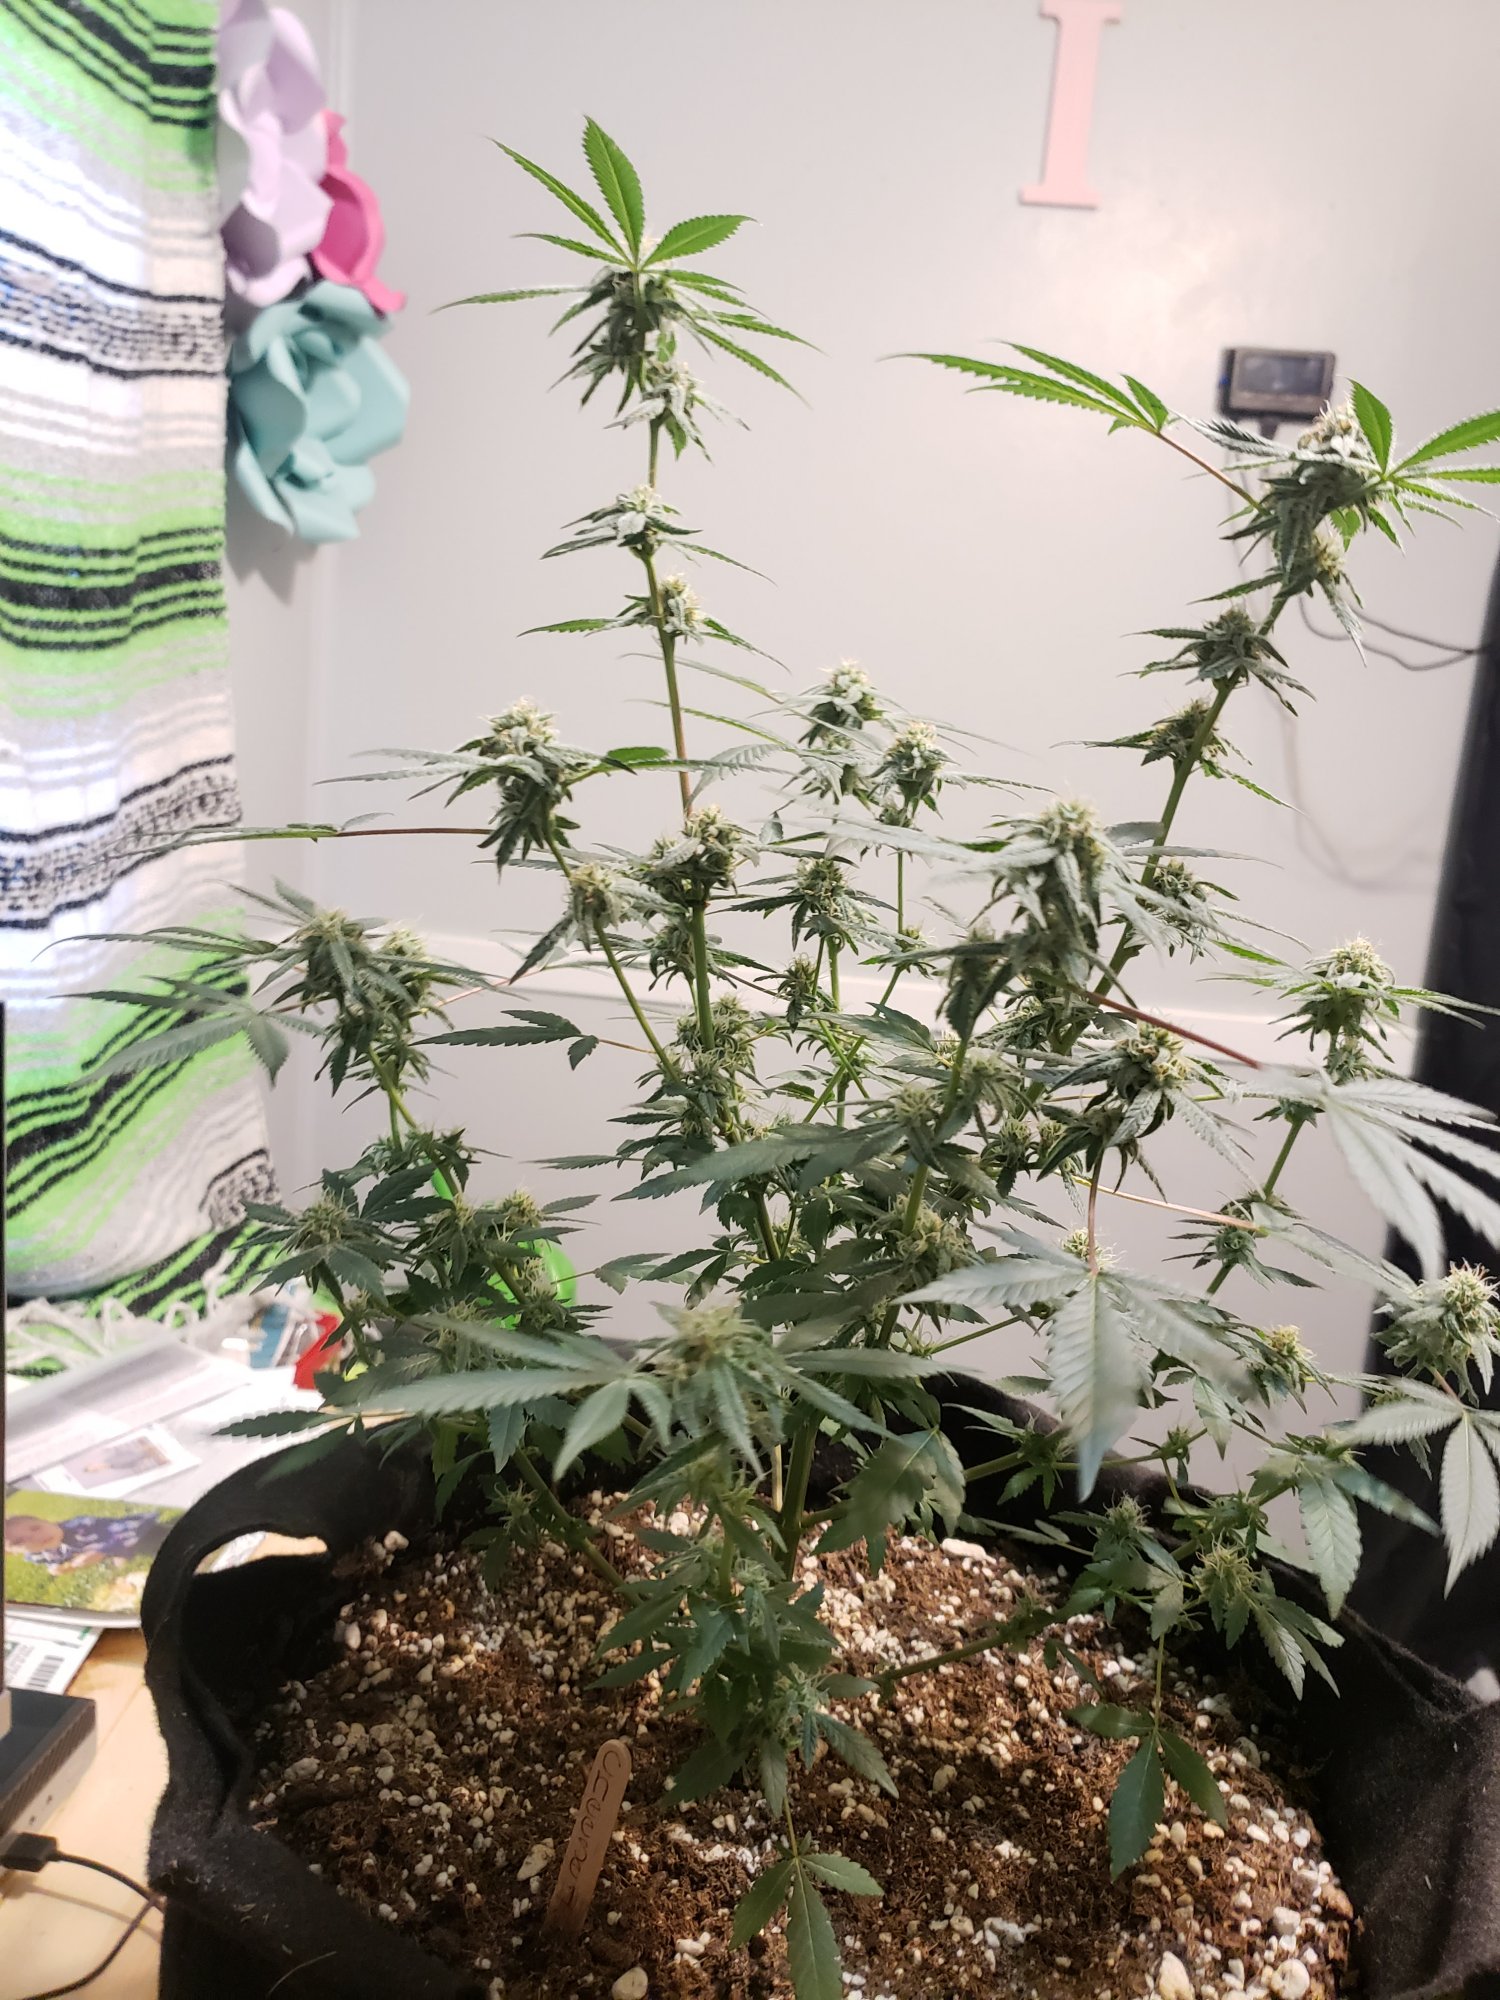 First grow month into flower 9